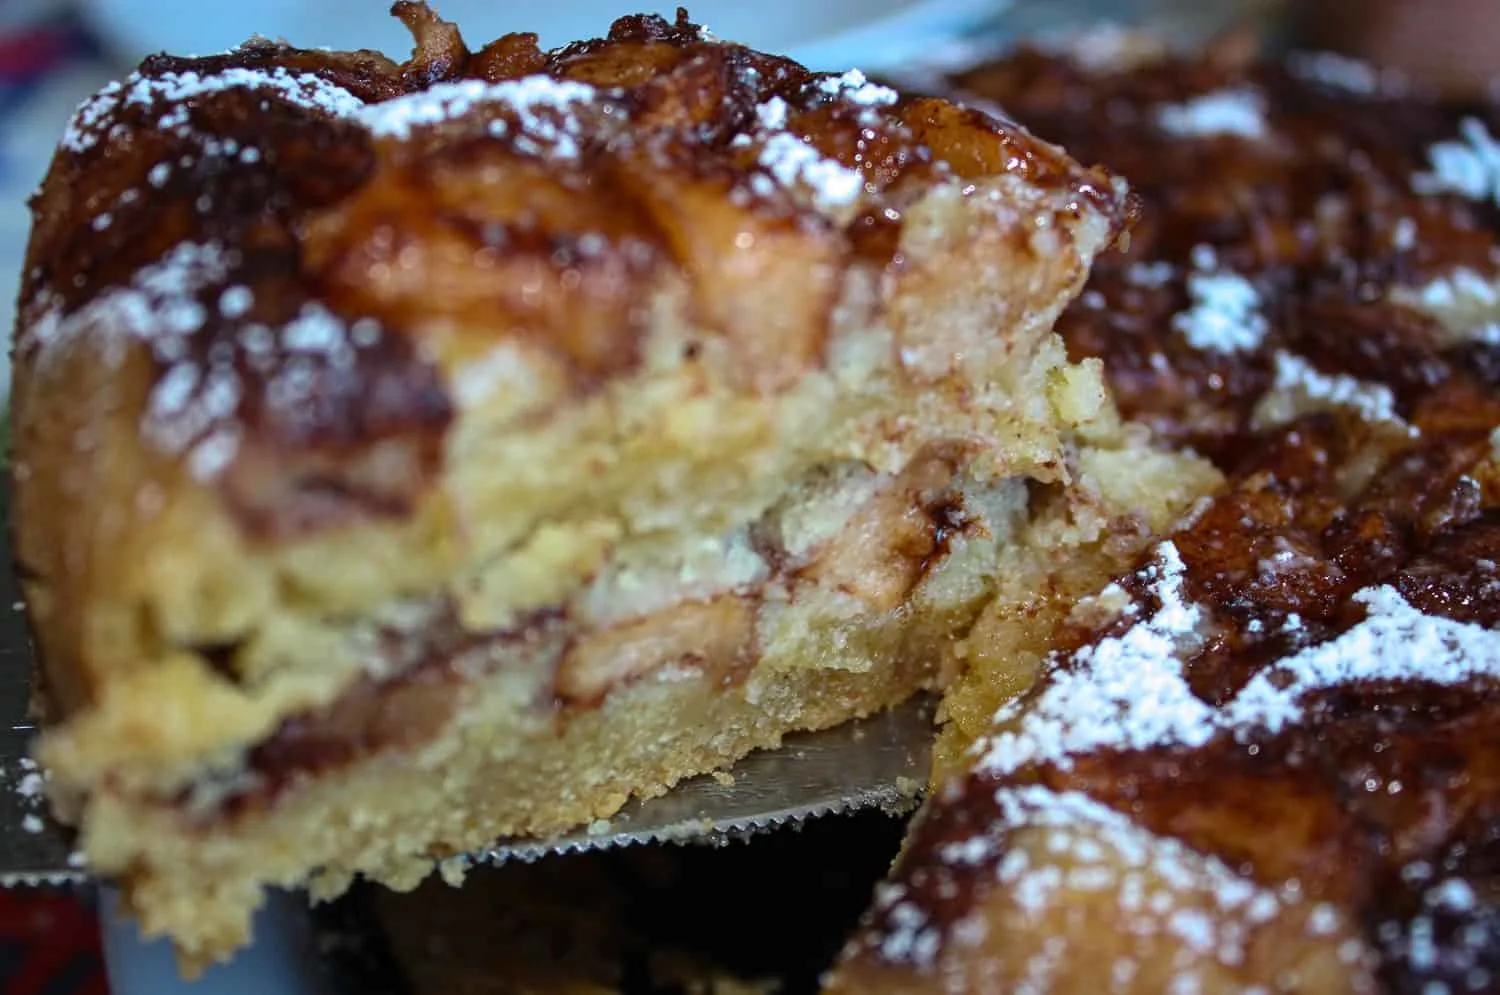 The apple trees on the farm are heavy with apples now.  Time for some apple recipes.  This Instant Pot Apple Cake is quick to prepare and has the texture of coffee cake.